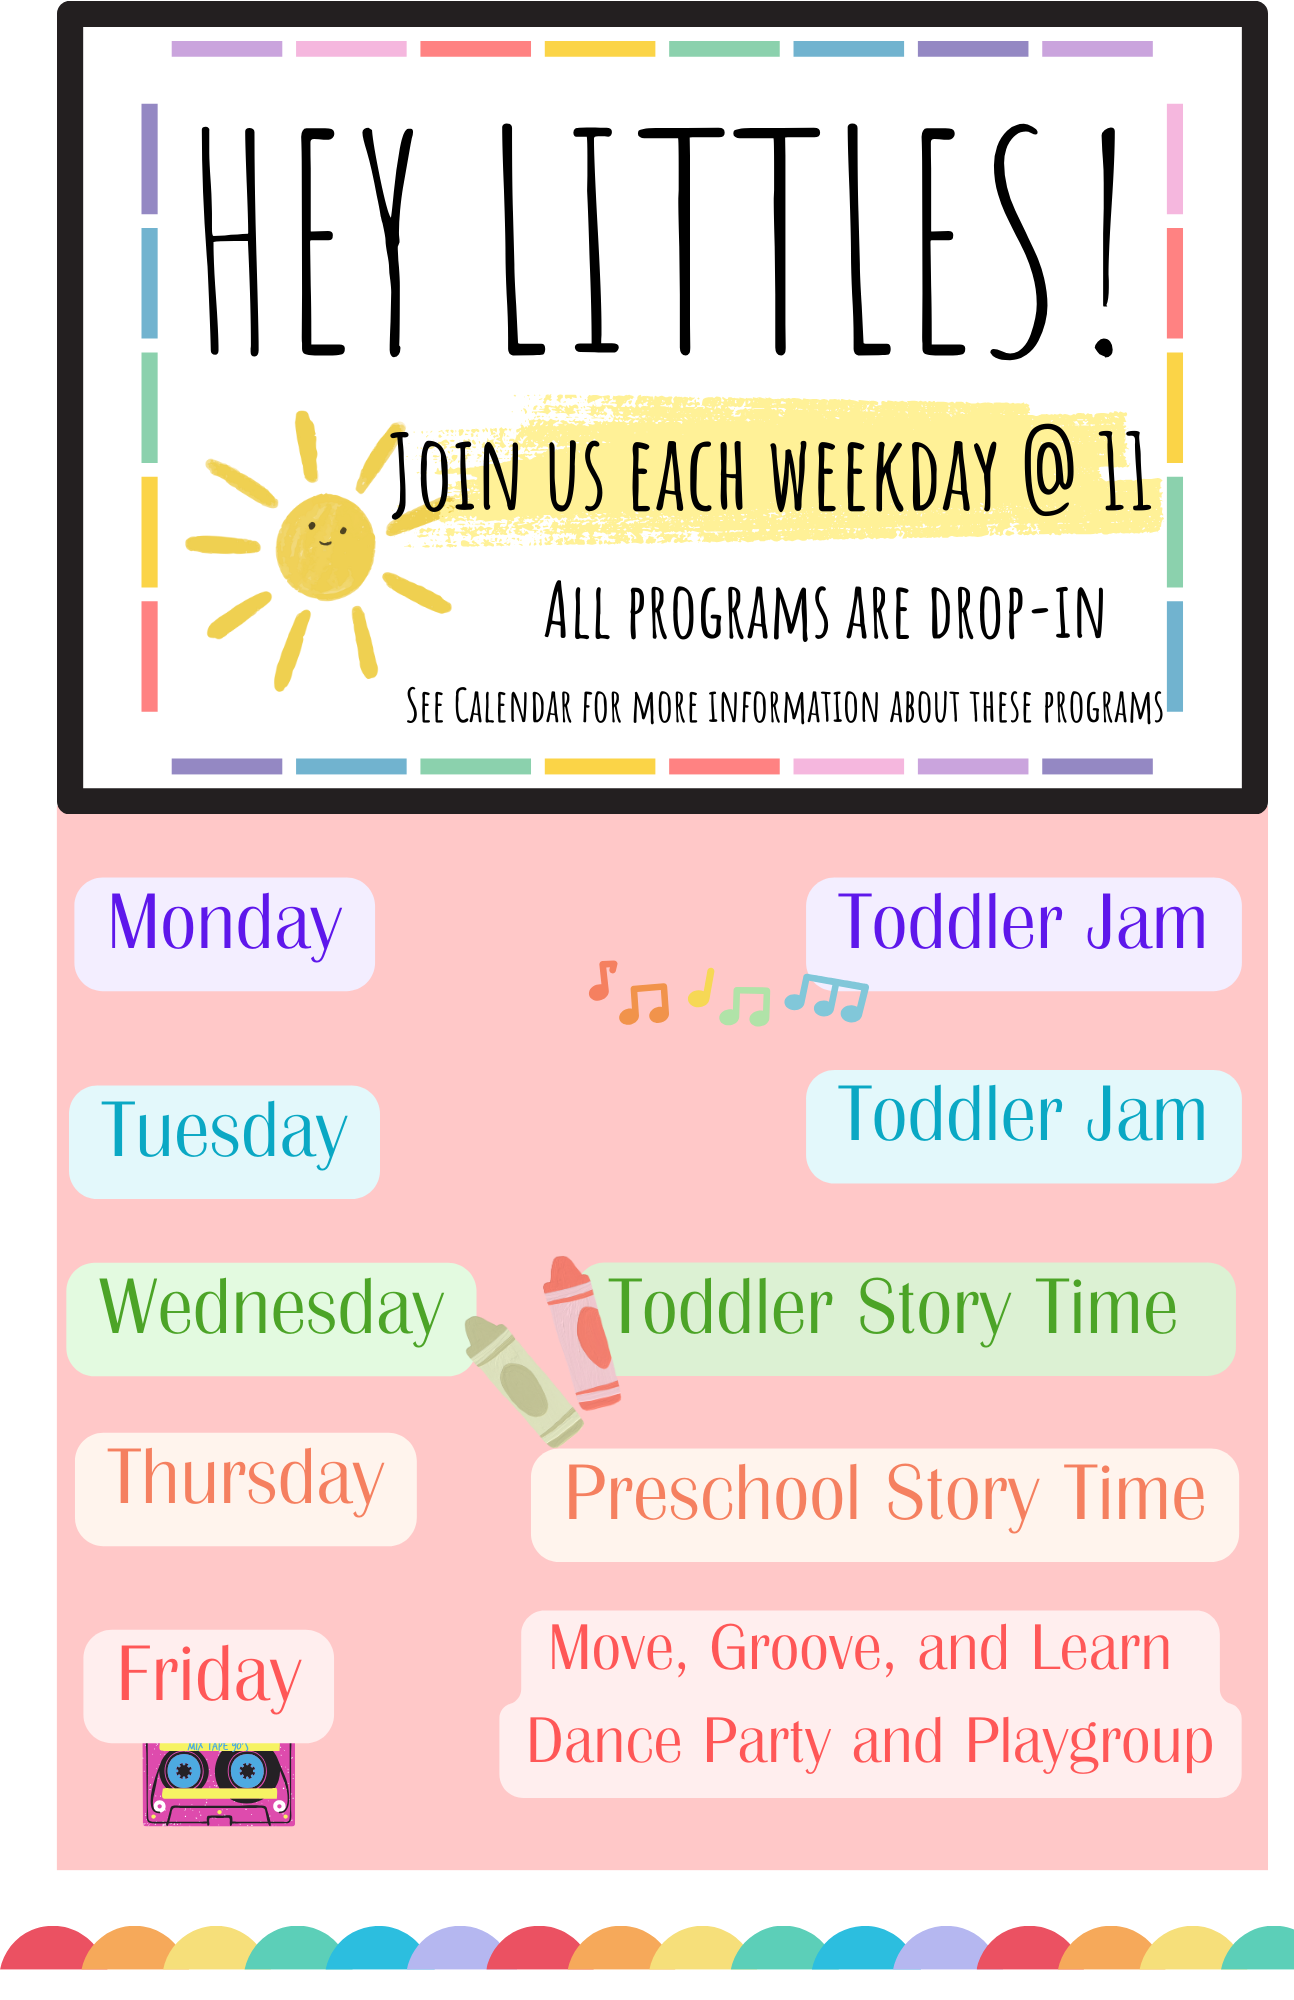 Early Childhood Programs weekdays at 11